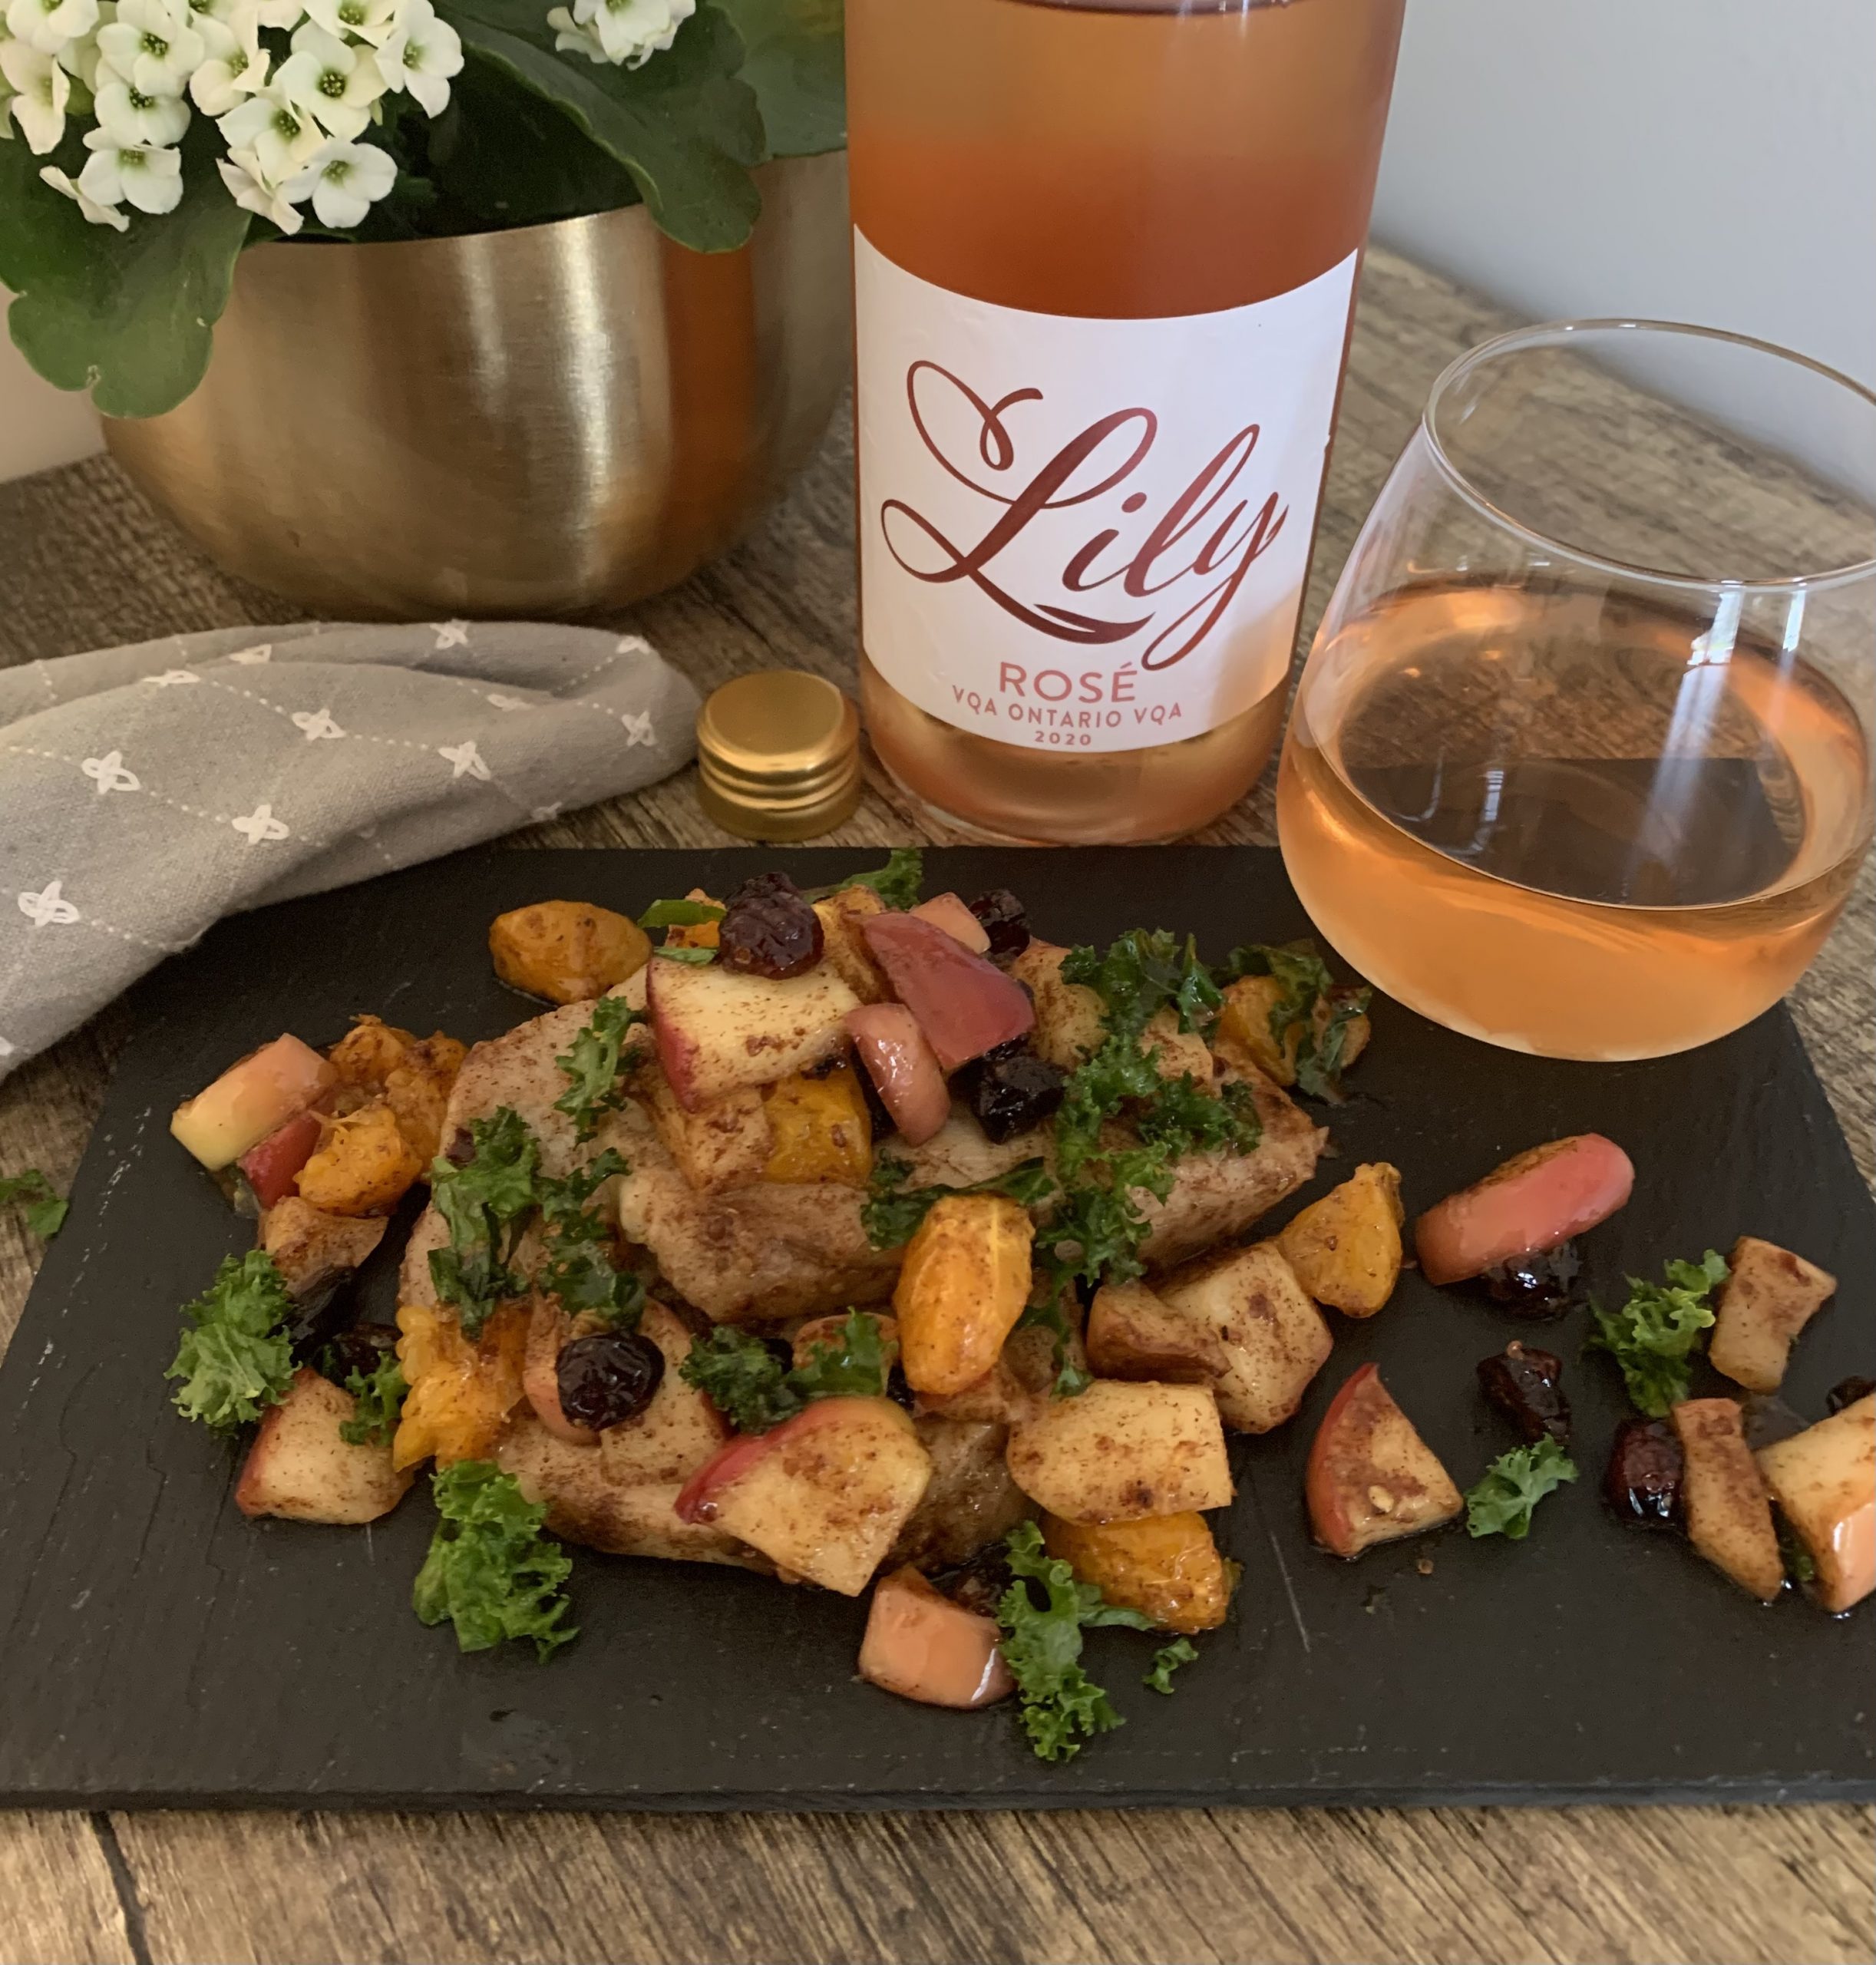 Featured image for “Colio Winery Rosé 2020 with Roasted Pork & Apple Chutney.”